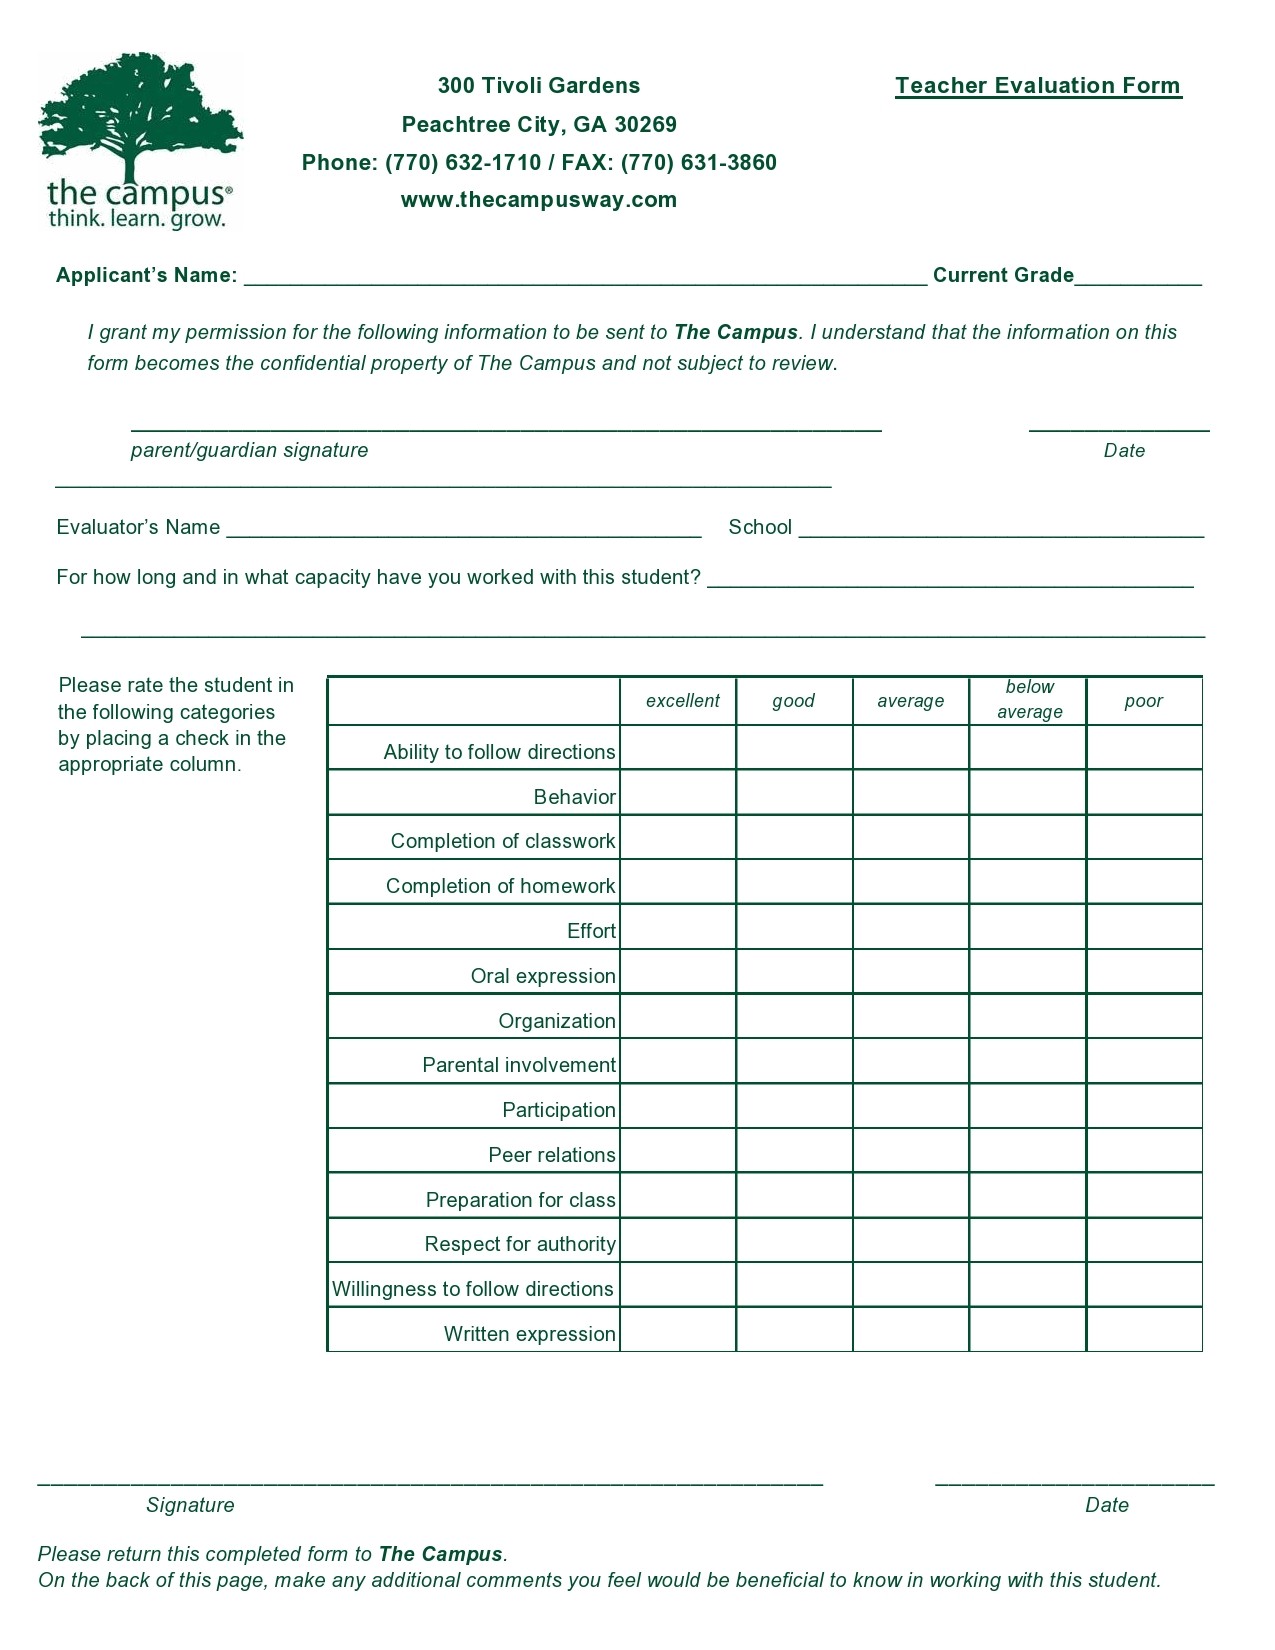 Teacher Evaluation Form For Students